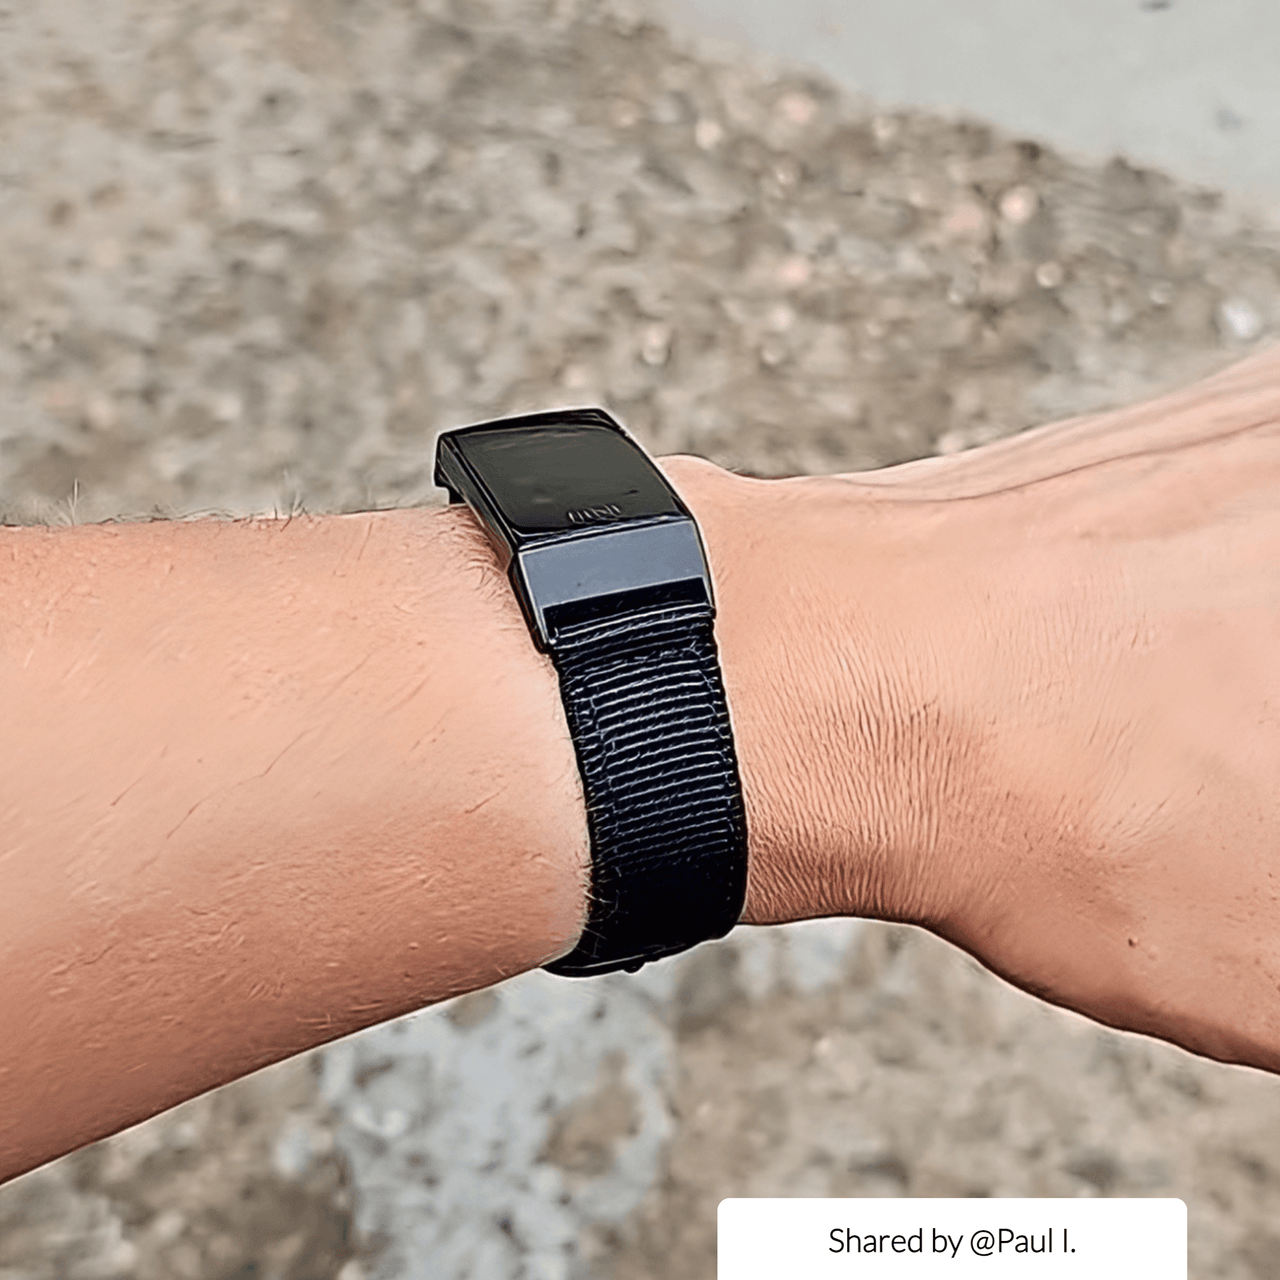 Nylon Sports Loop for Fitbit Charge 2 - 5 - watchband.direct